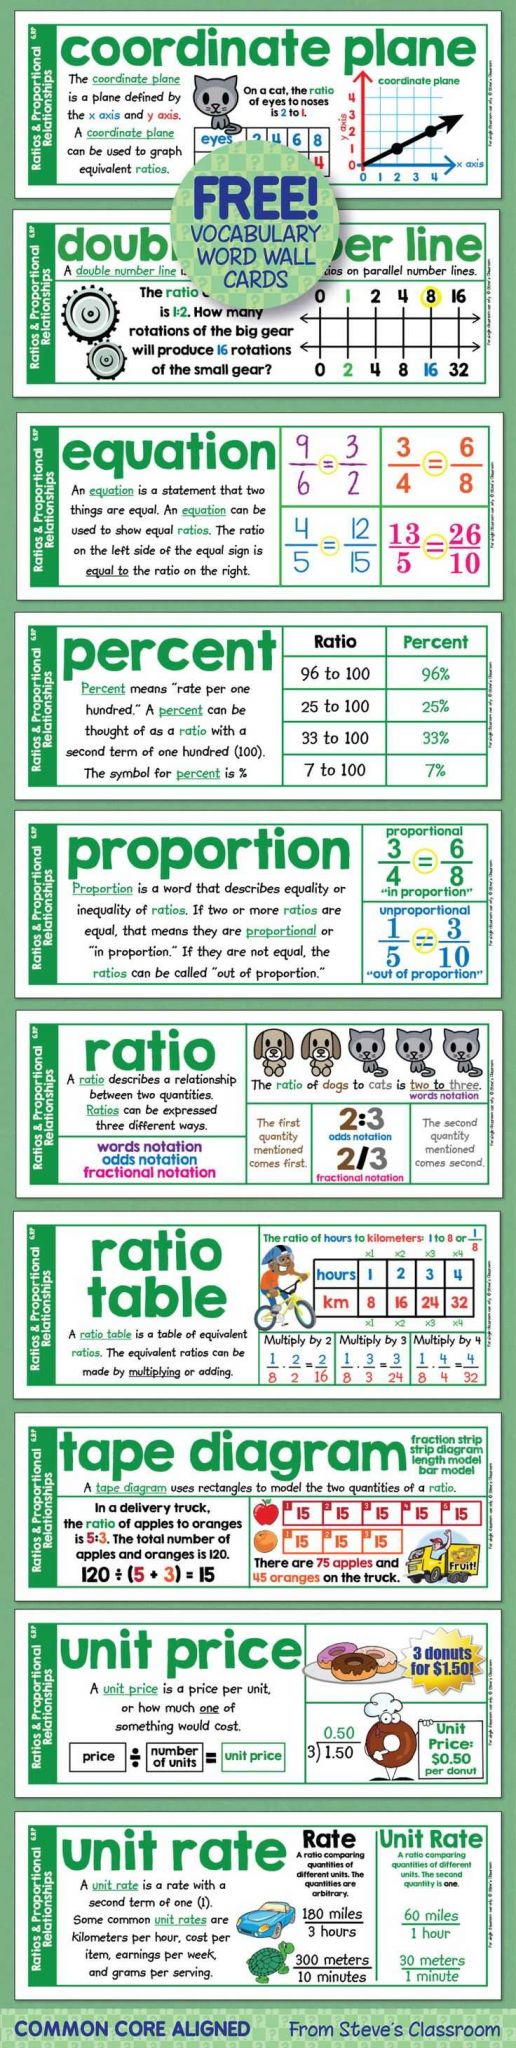 Proportion Word Problems Worksheet 7th Grade or Best 24 Ratios Proportions Ideas On Pinterest